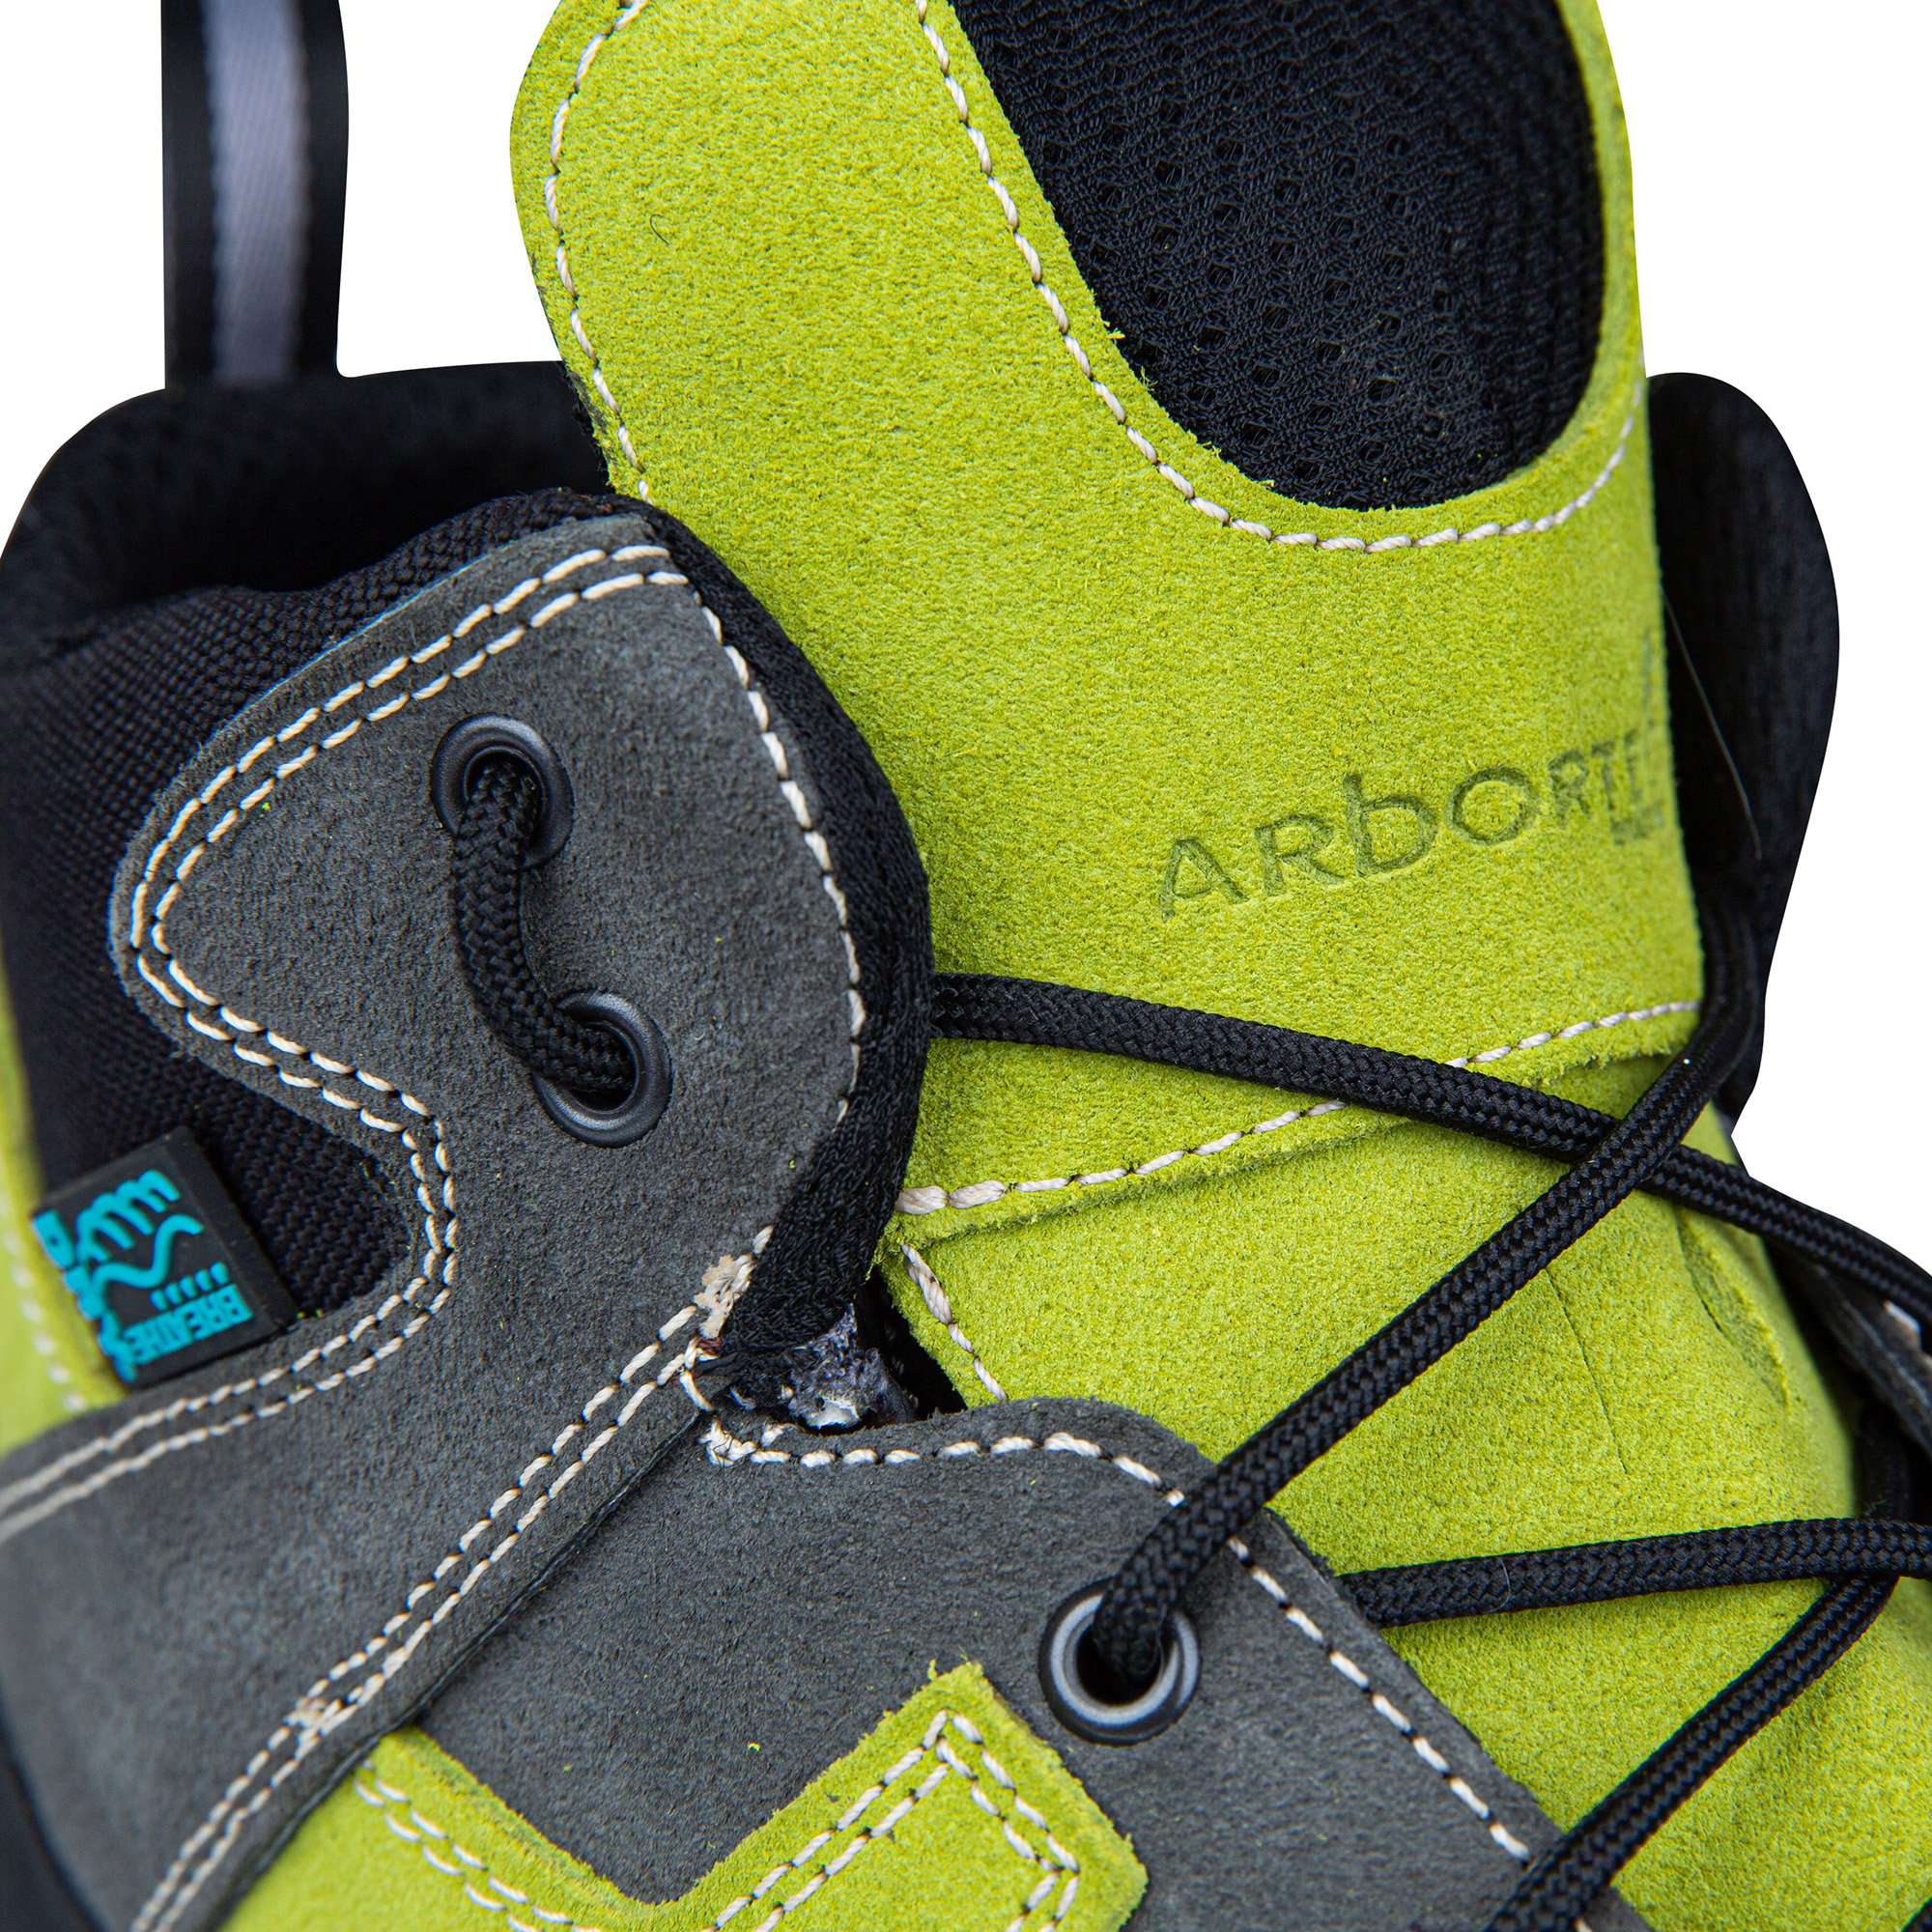 Ascent Pro Climbing Boot AT51000 - Green - Arbortec Forestwear